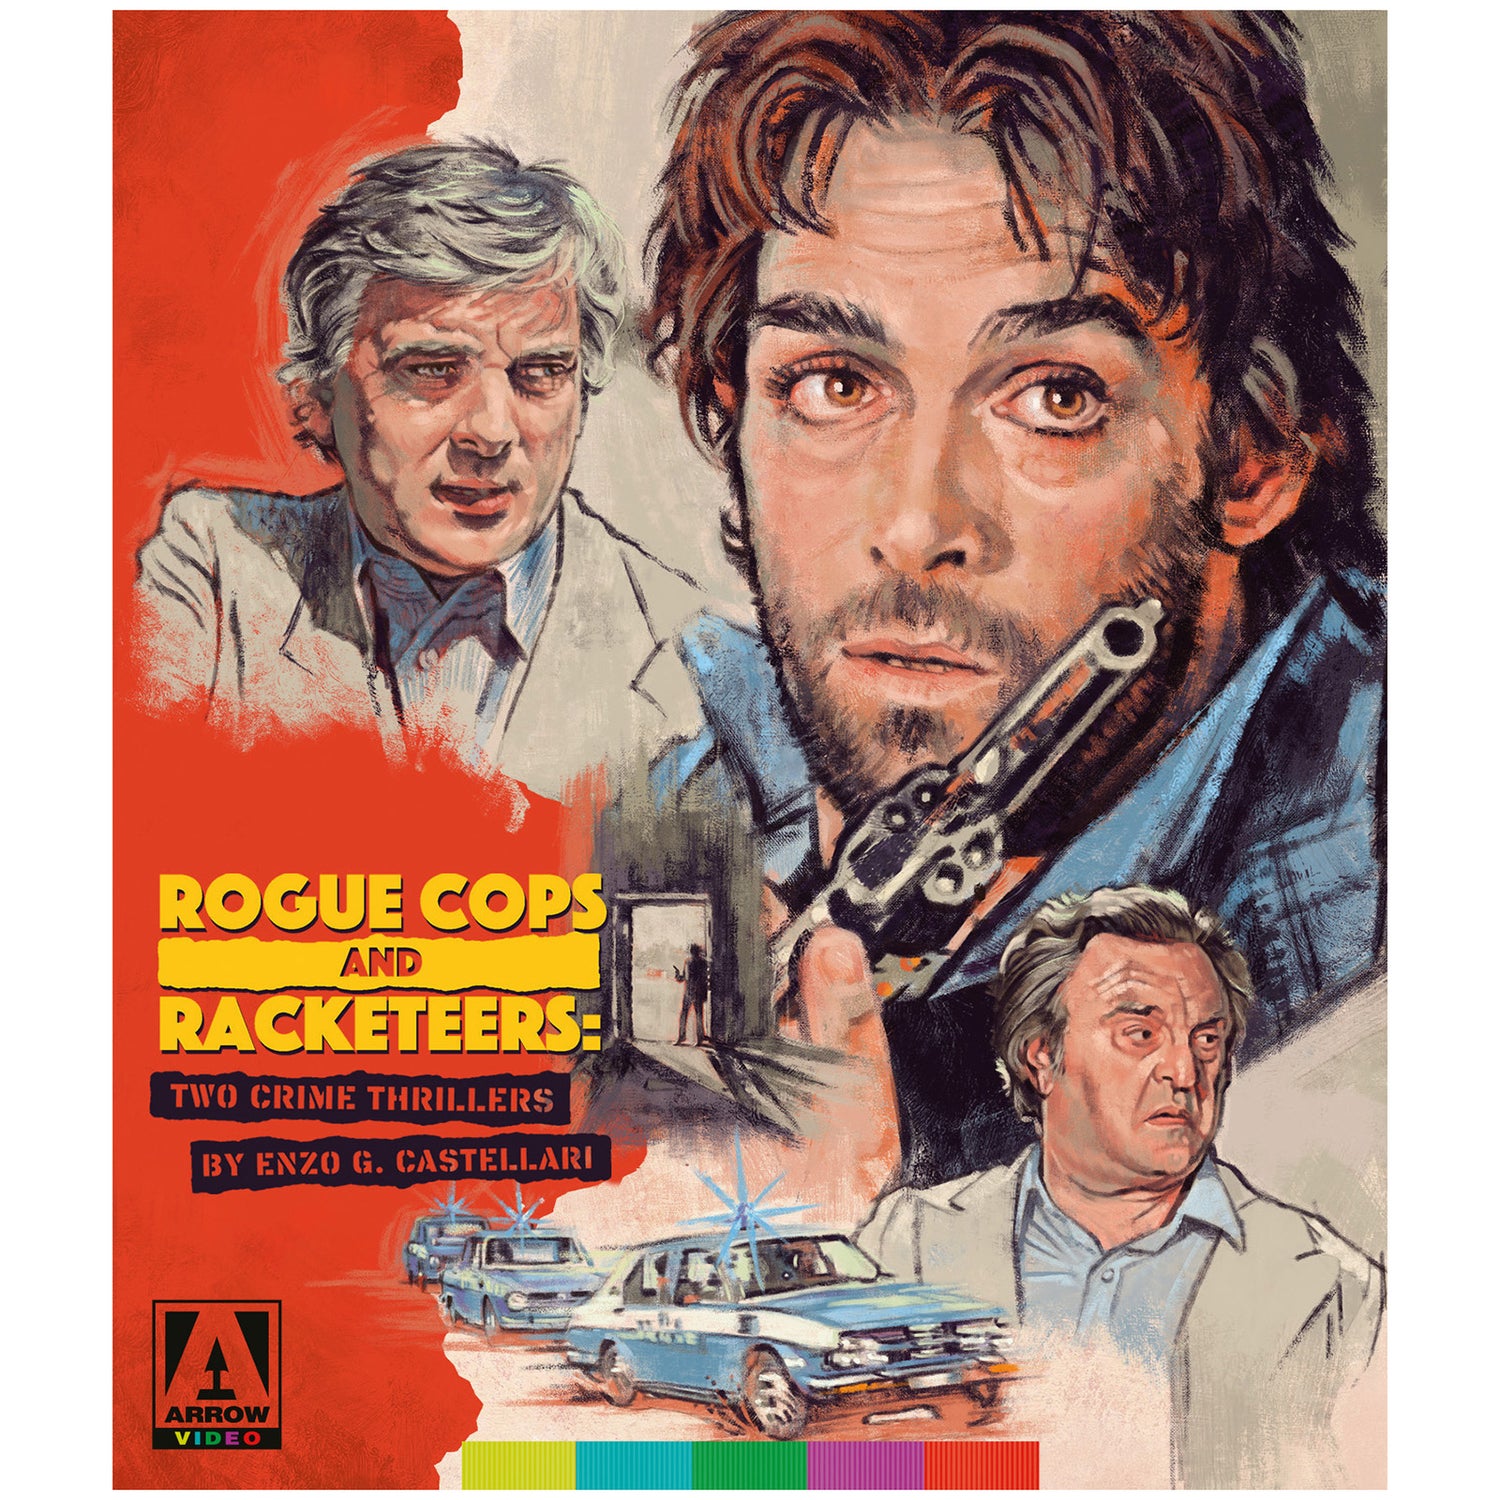 Rogue Cops and Racketeers: Two Films by Enzo G. Castellari Blu-ray